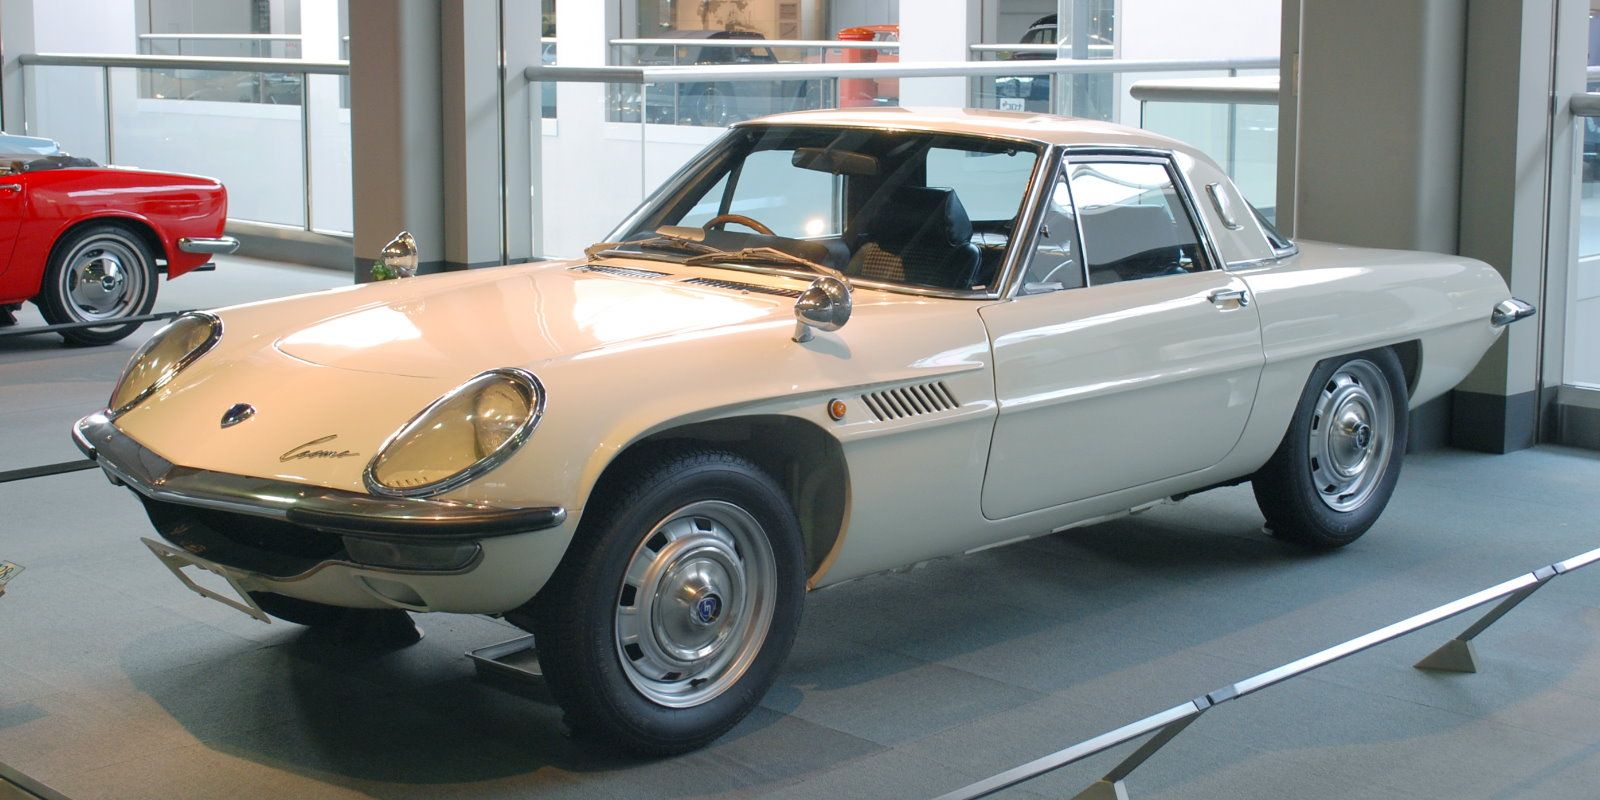 1967 Mazda Cosmo Sport in an auction shop.